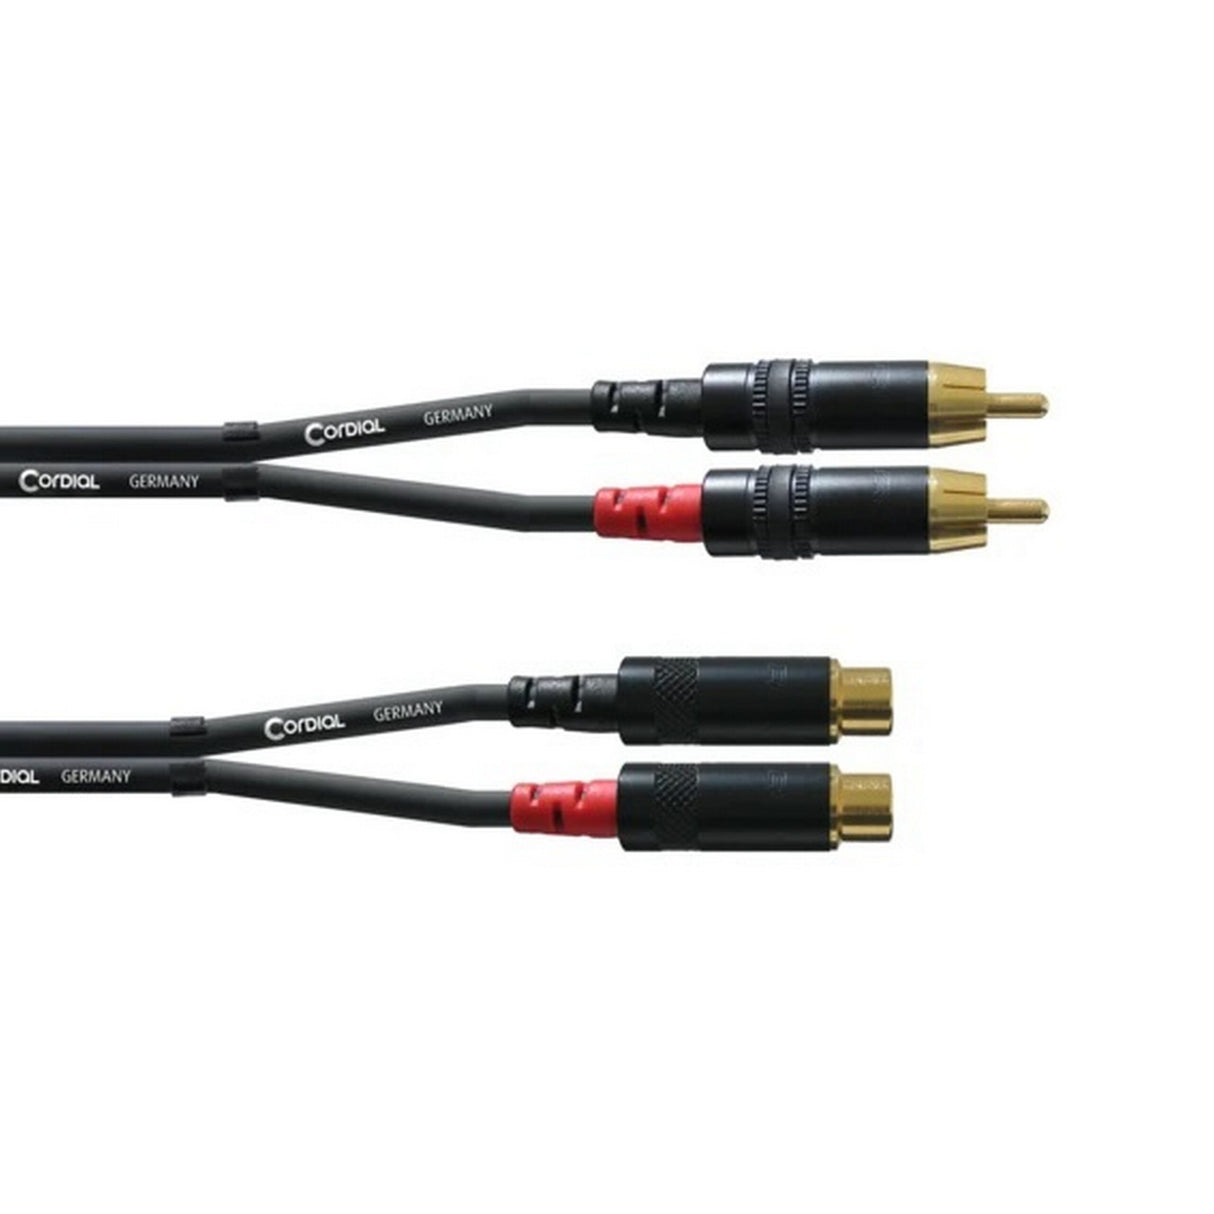 Cordial CFU 1.5 CE 2 x RCA to 2 x Female RCA Twin Cable/Adapter, Black, 5-Feet